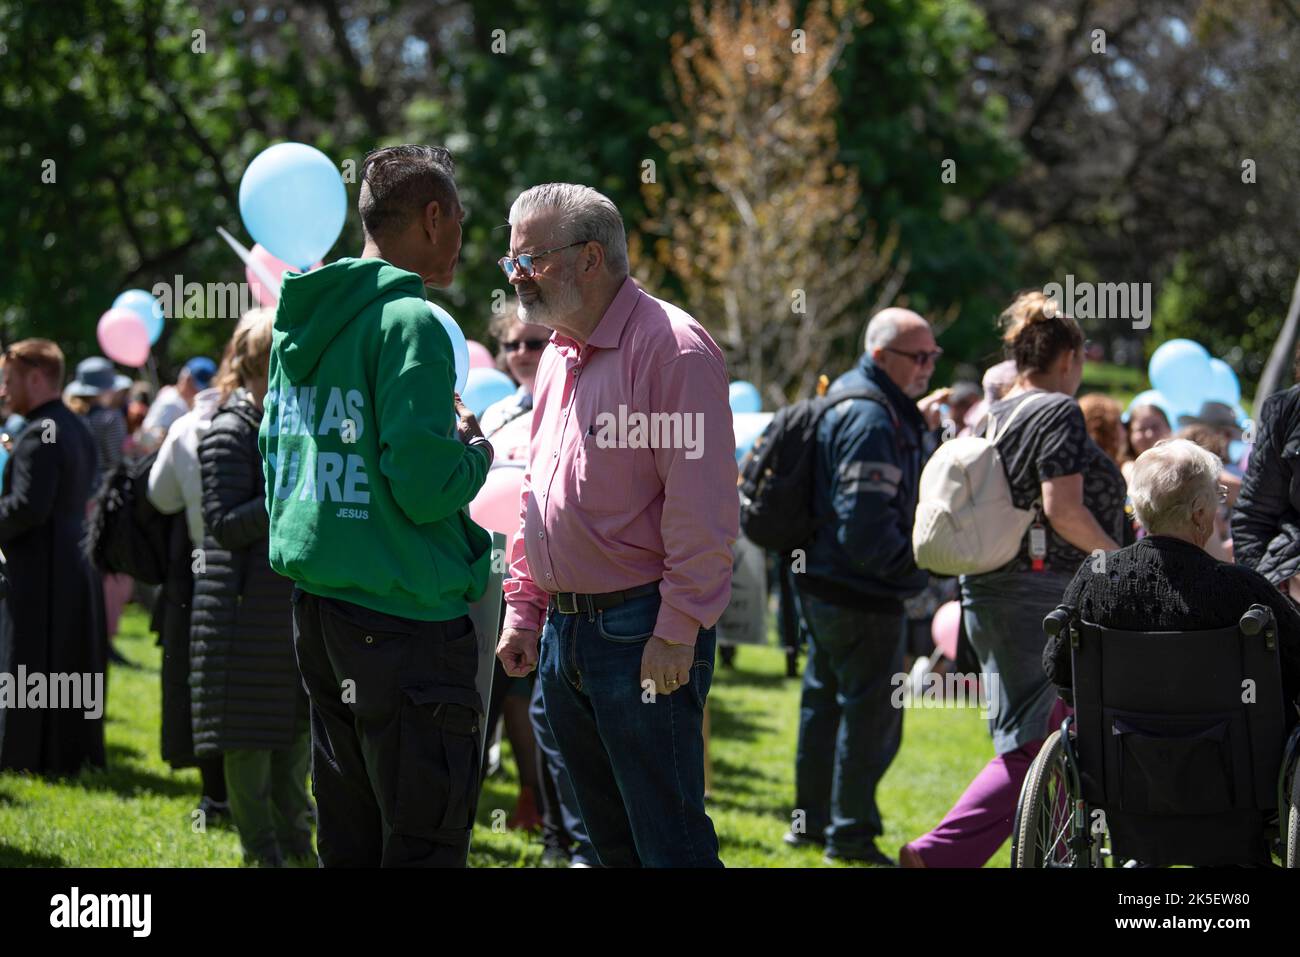 Melbourne, Australia, October 8th 2022. Liberal MP Bernie Finn speaks with a protester at an anti-abortion march. Credit: Jay Kogler/Alamy Live News Stock Photo